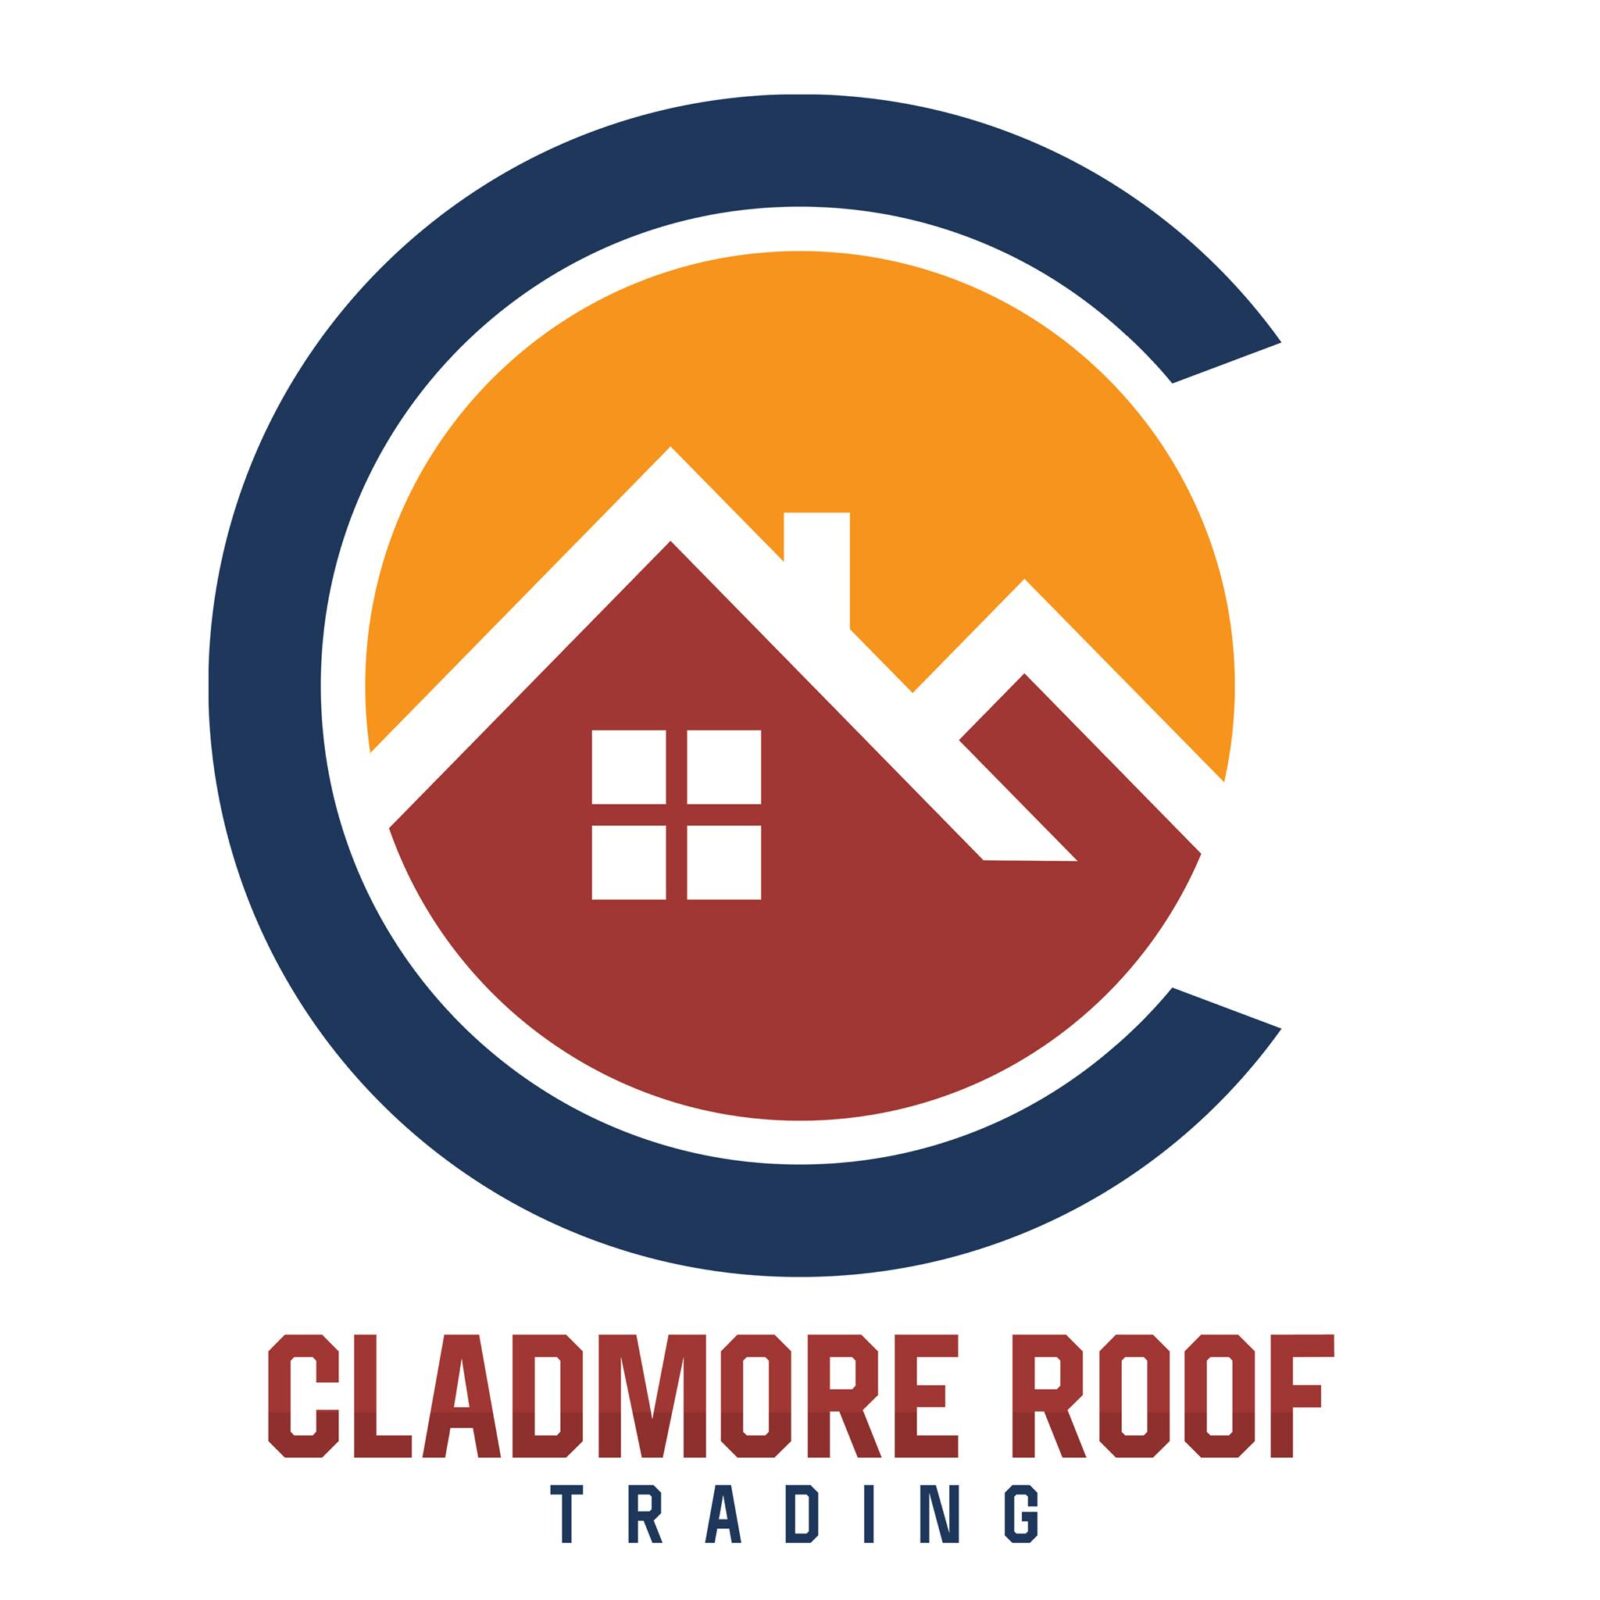 Cladmore Roof Trading